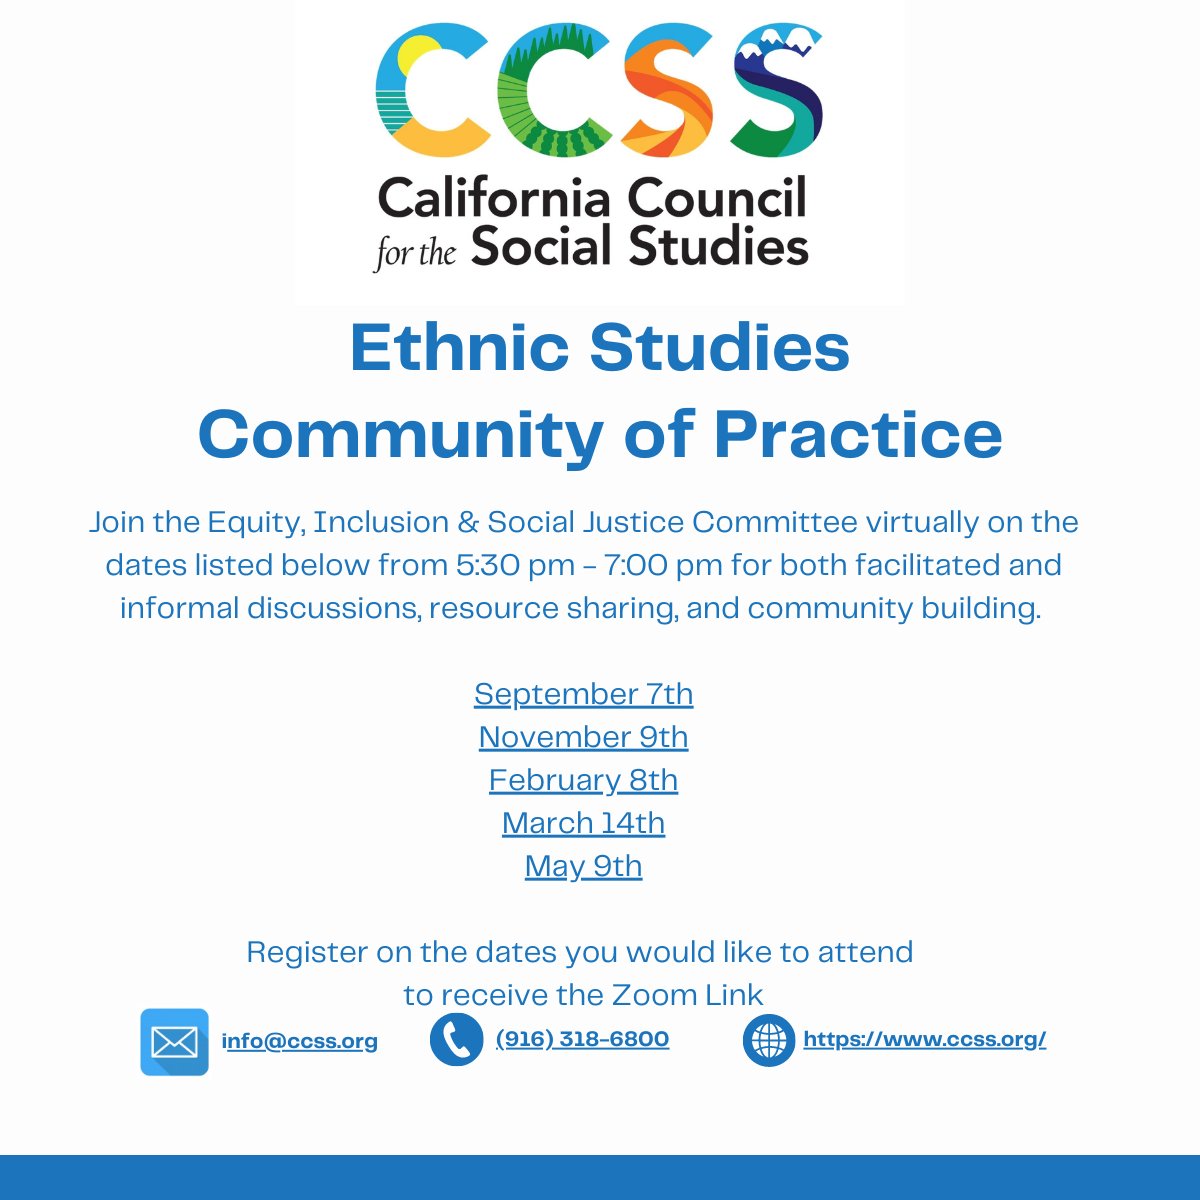 TODAY! Join our next #CCSS Ethnic Studies Community of Practice on April 18th at 5:30p PST (replacing the event from March). Learn and share about your districts implementation of Ethnic Studies. #sschat #caedchat #ethnicstudies Register at casocialstudies.org/event-5376498